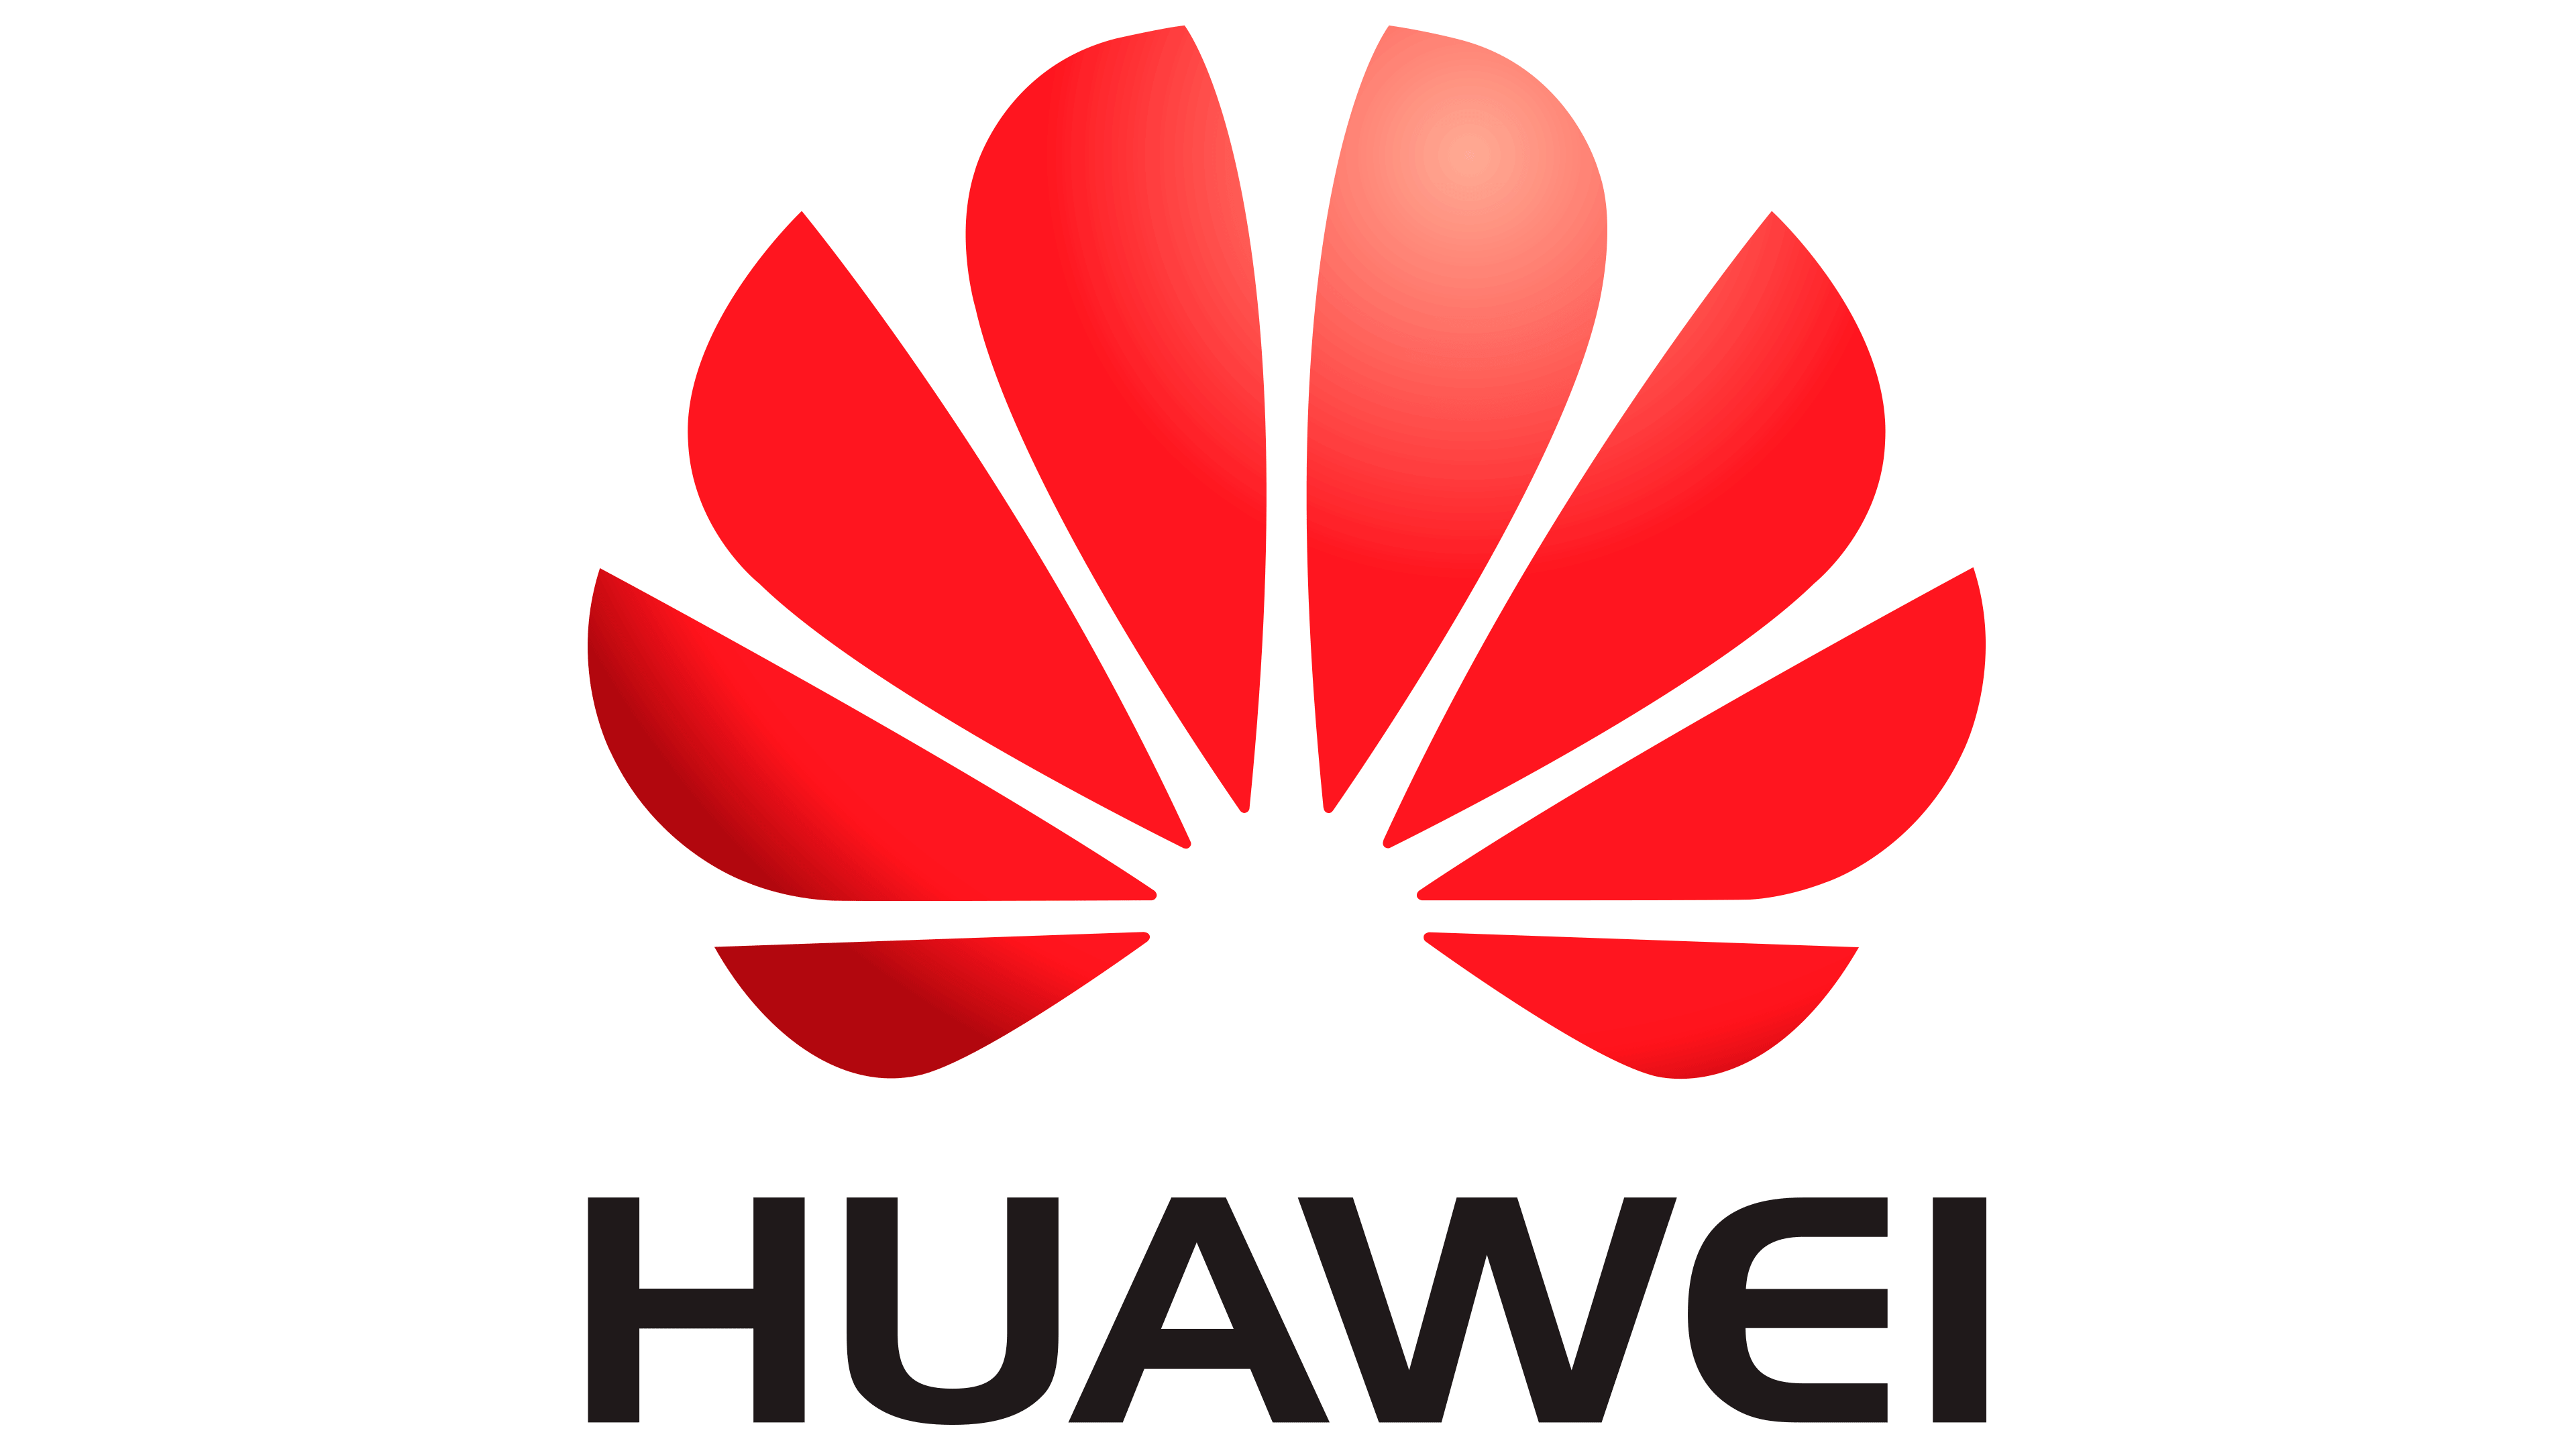 Huawei tablet Repair services in Montreal